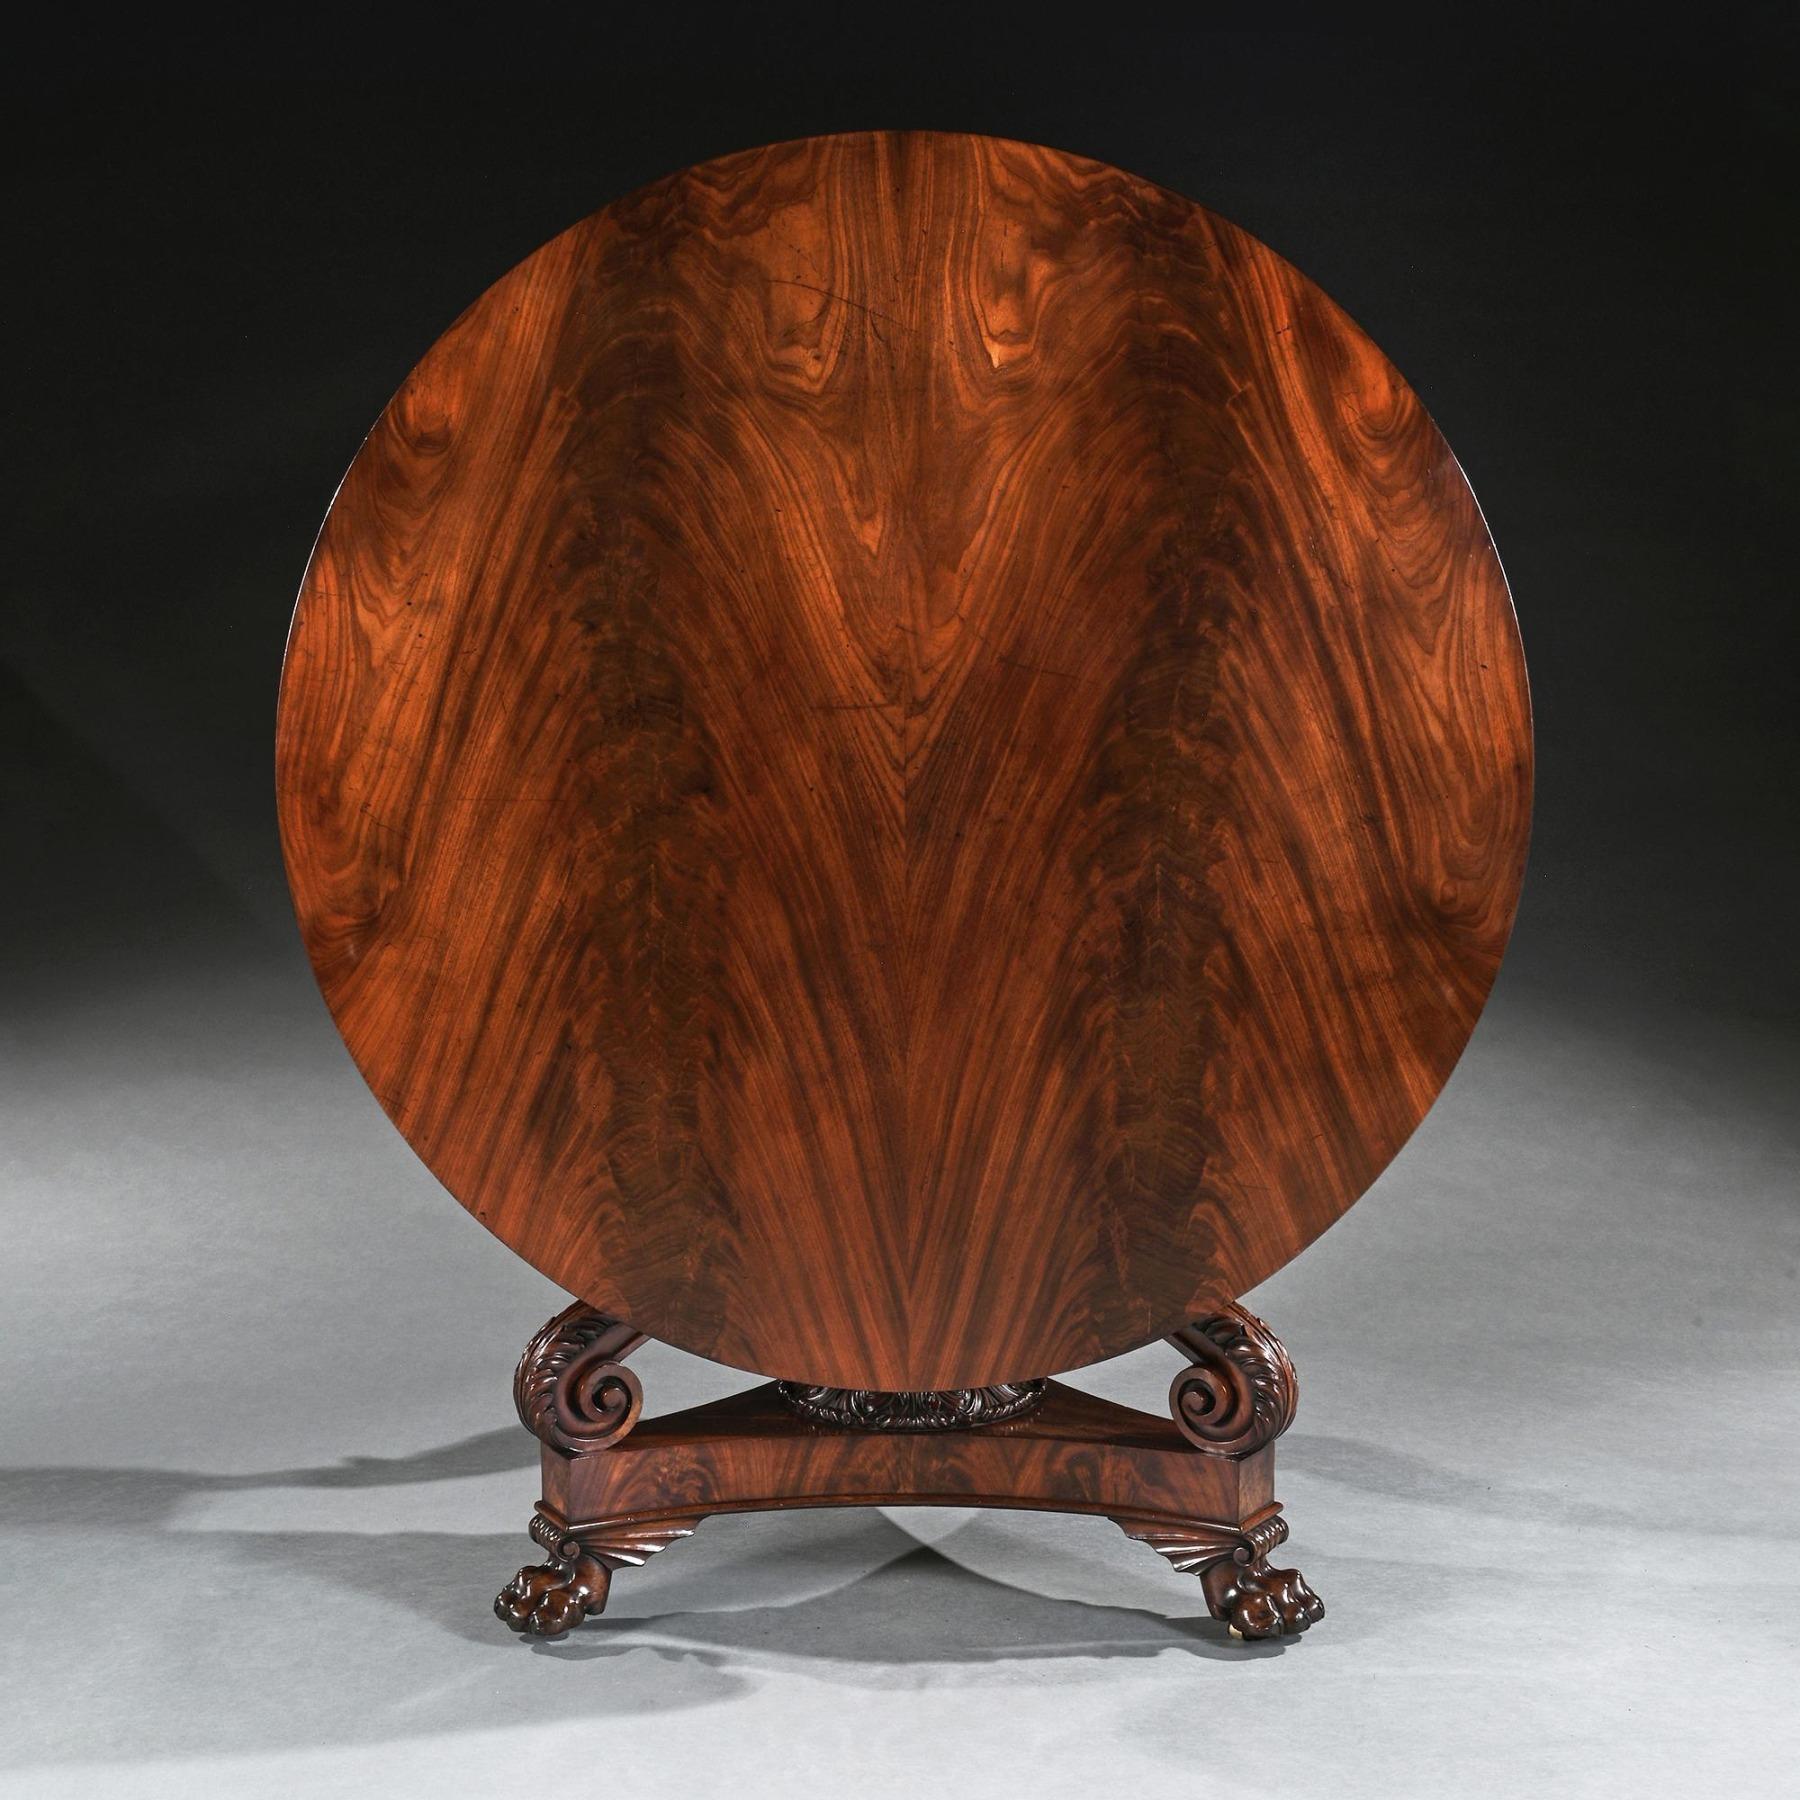 A superb Late Regency Mahogany Centre Table c.1825, English or Possibly Scottish and Possibly a Unique Commission Based on the Designs of George Smith

English / Scottish - Circa 1825

The top of finely chosen mahogany of excellent colour and figure